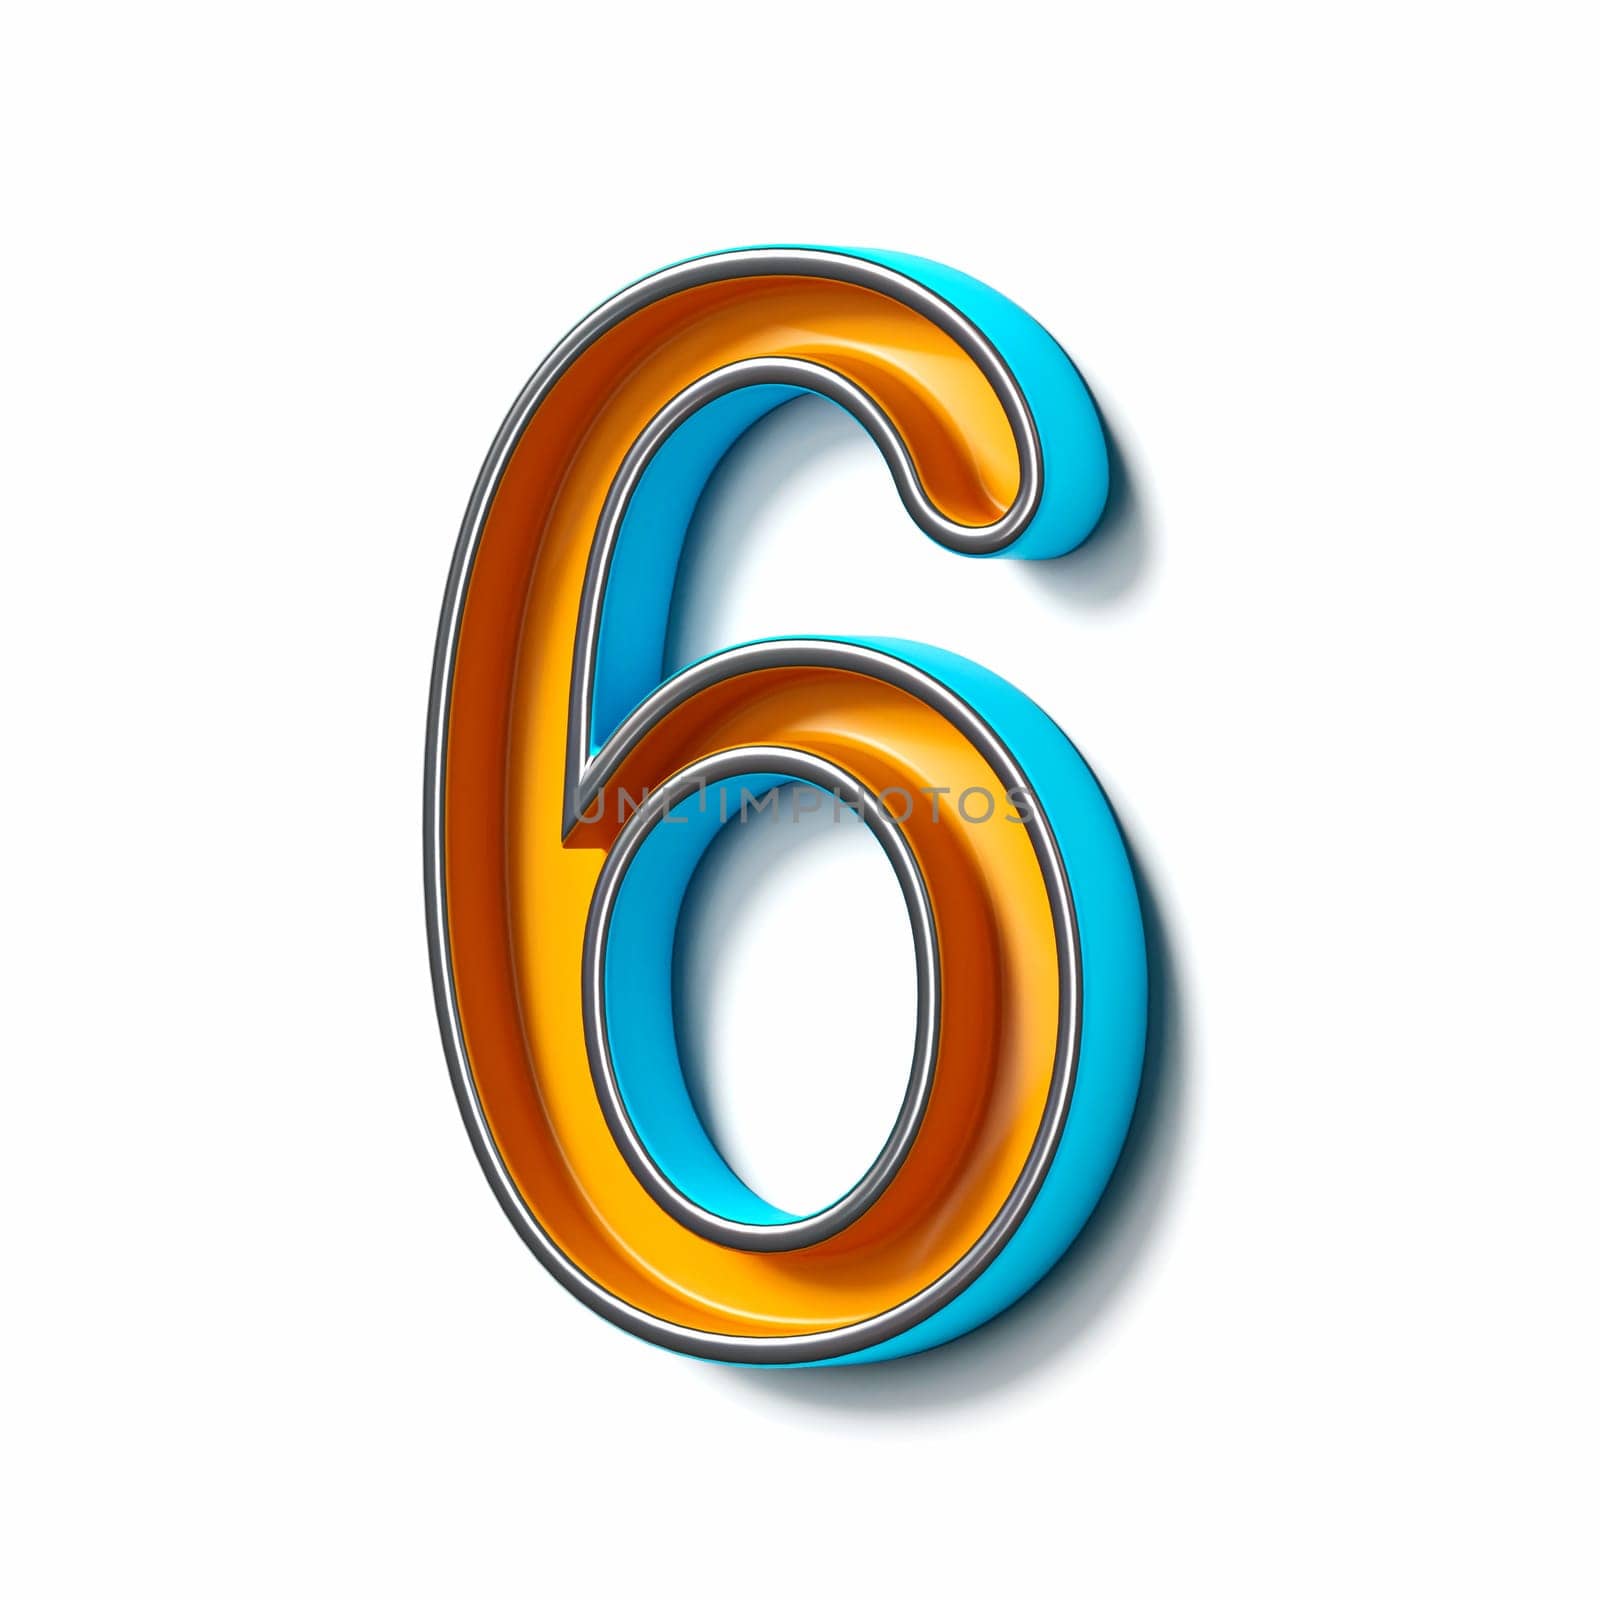 Orange blue thin metal font Number 6 SIX 3D rendering illustration isolated on white background